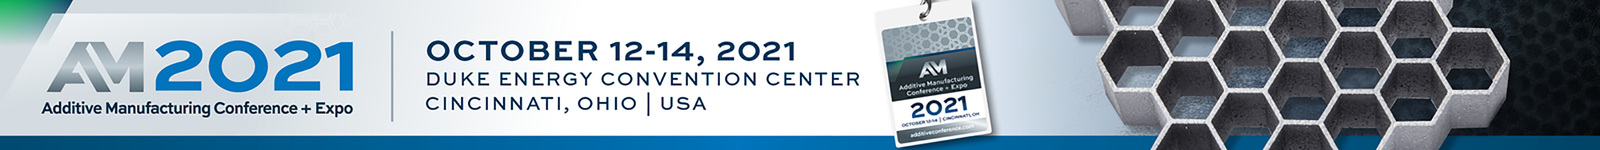 Additive Manufacturing Conference 2021 logo